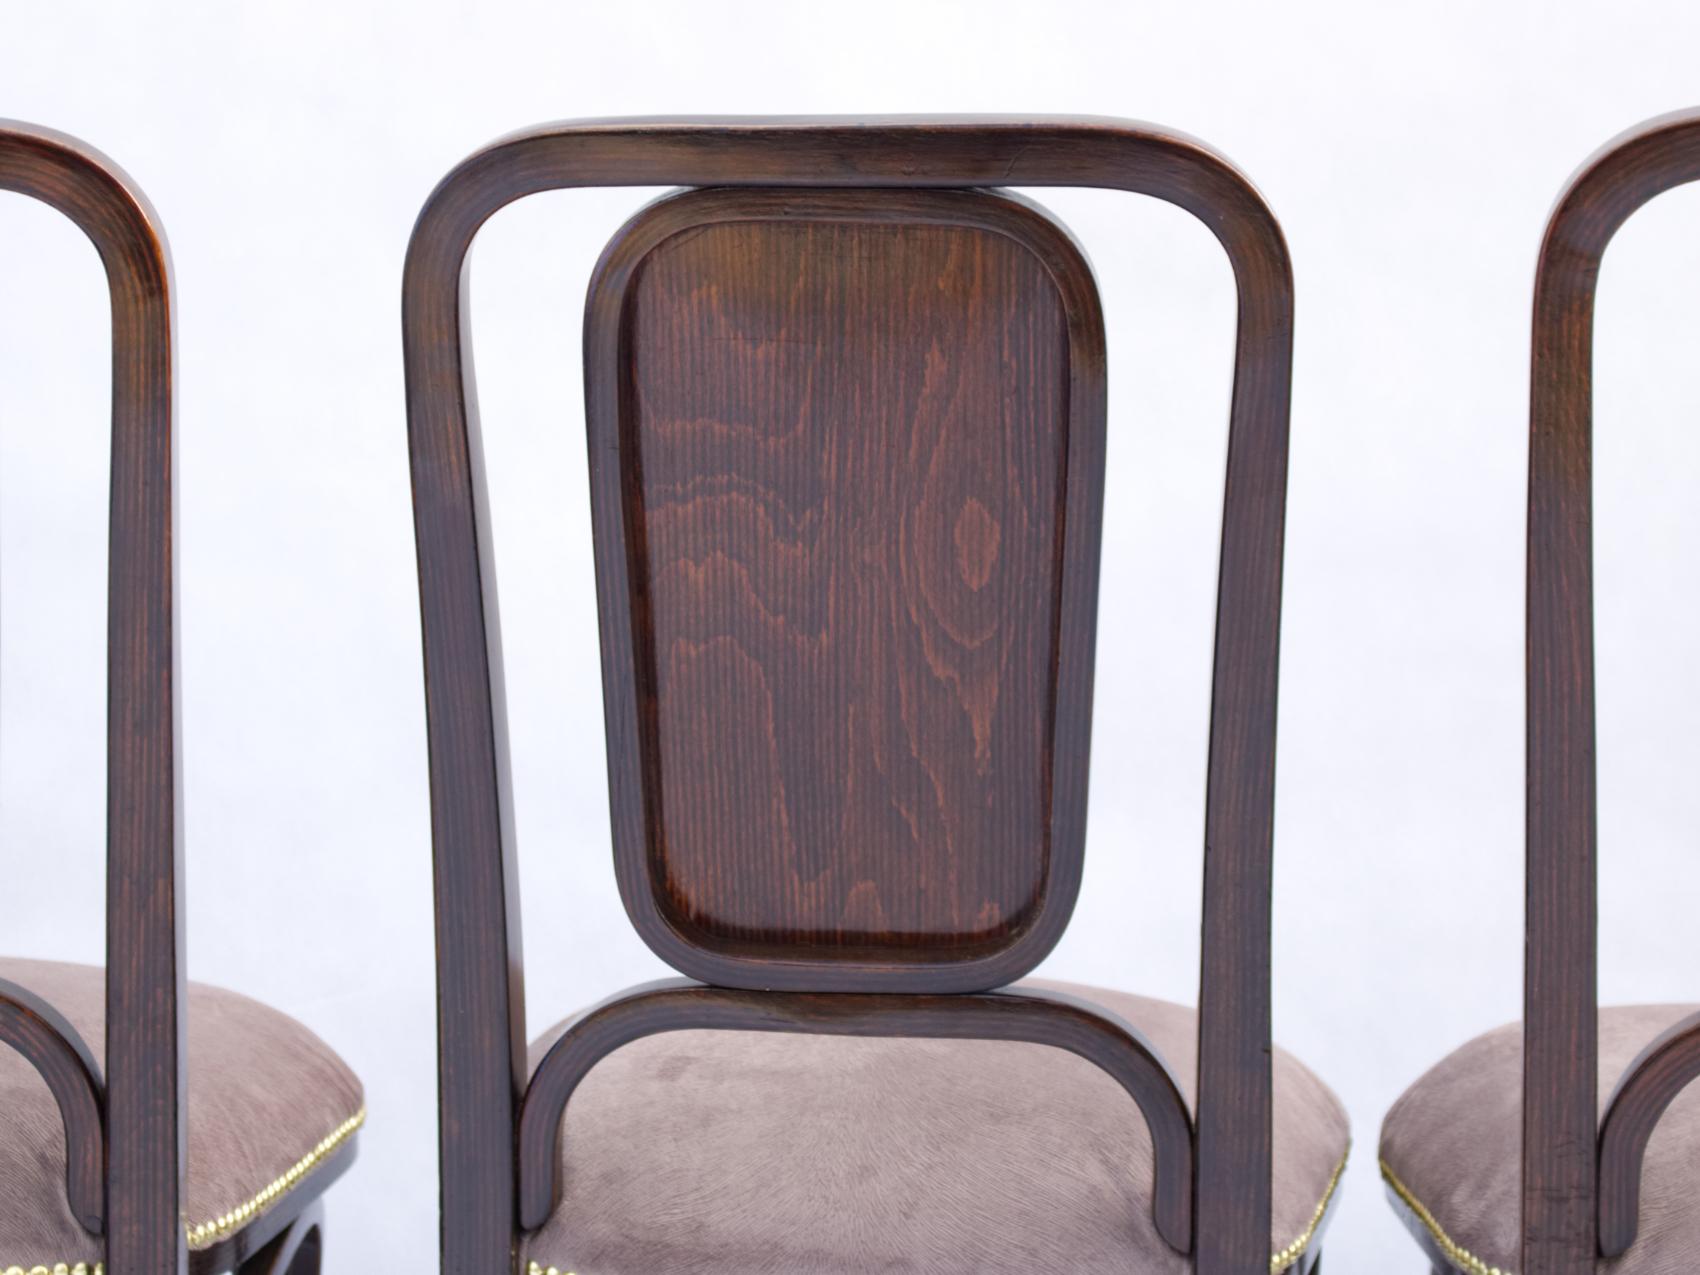 Upholstery Art Nouveau Bentwood Chairs by Thonet circa 1905, Set of 4